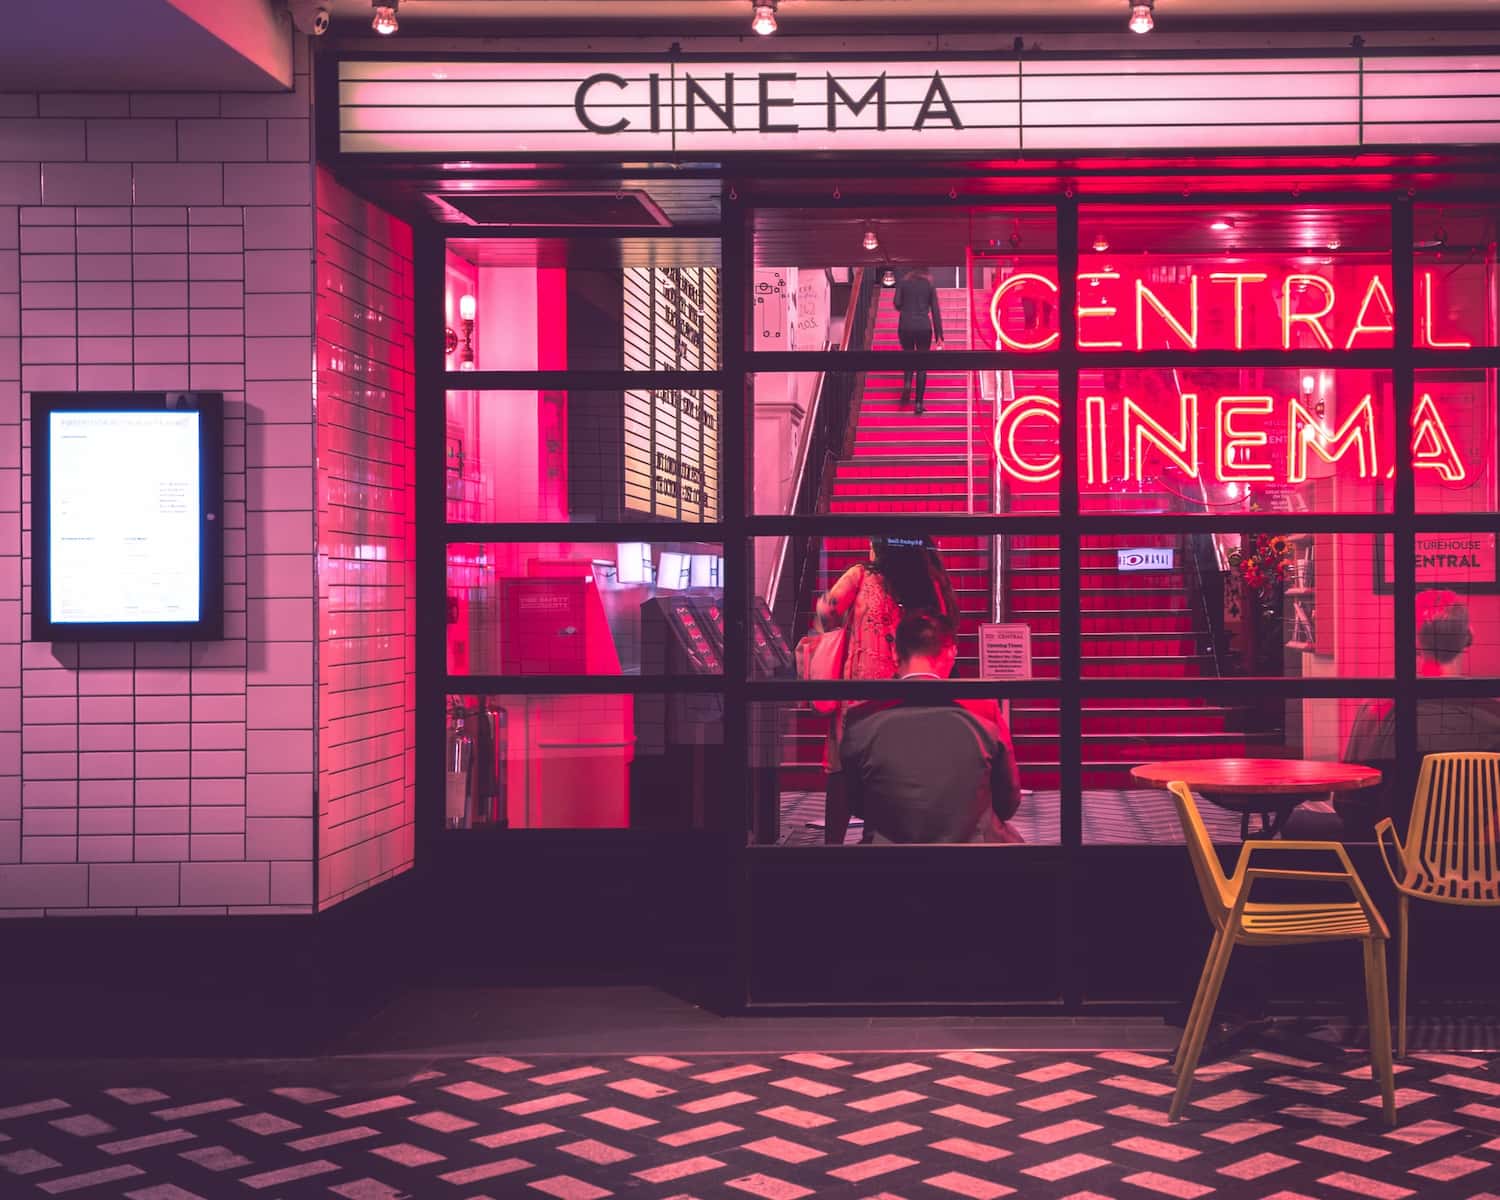 Cinema where people head to enjoy movies in a comfortable setting